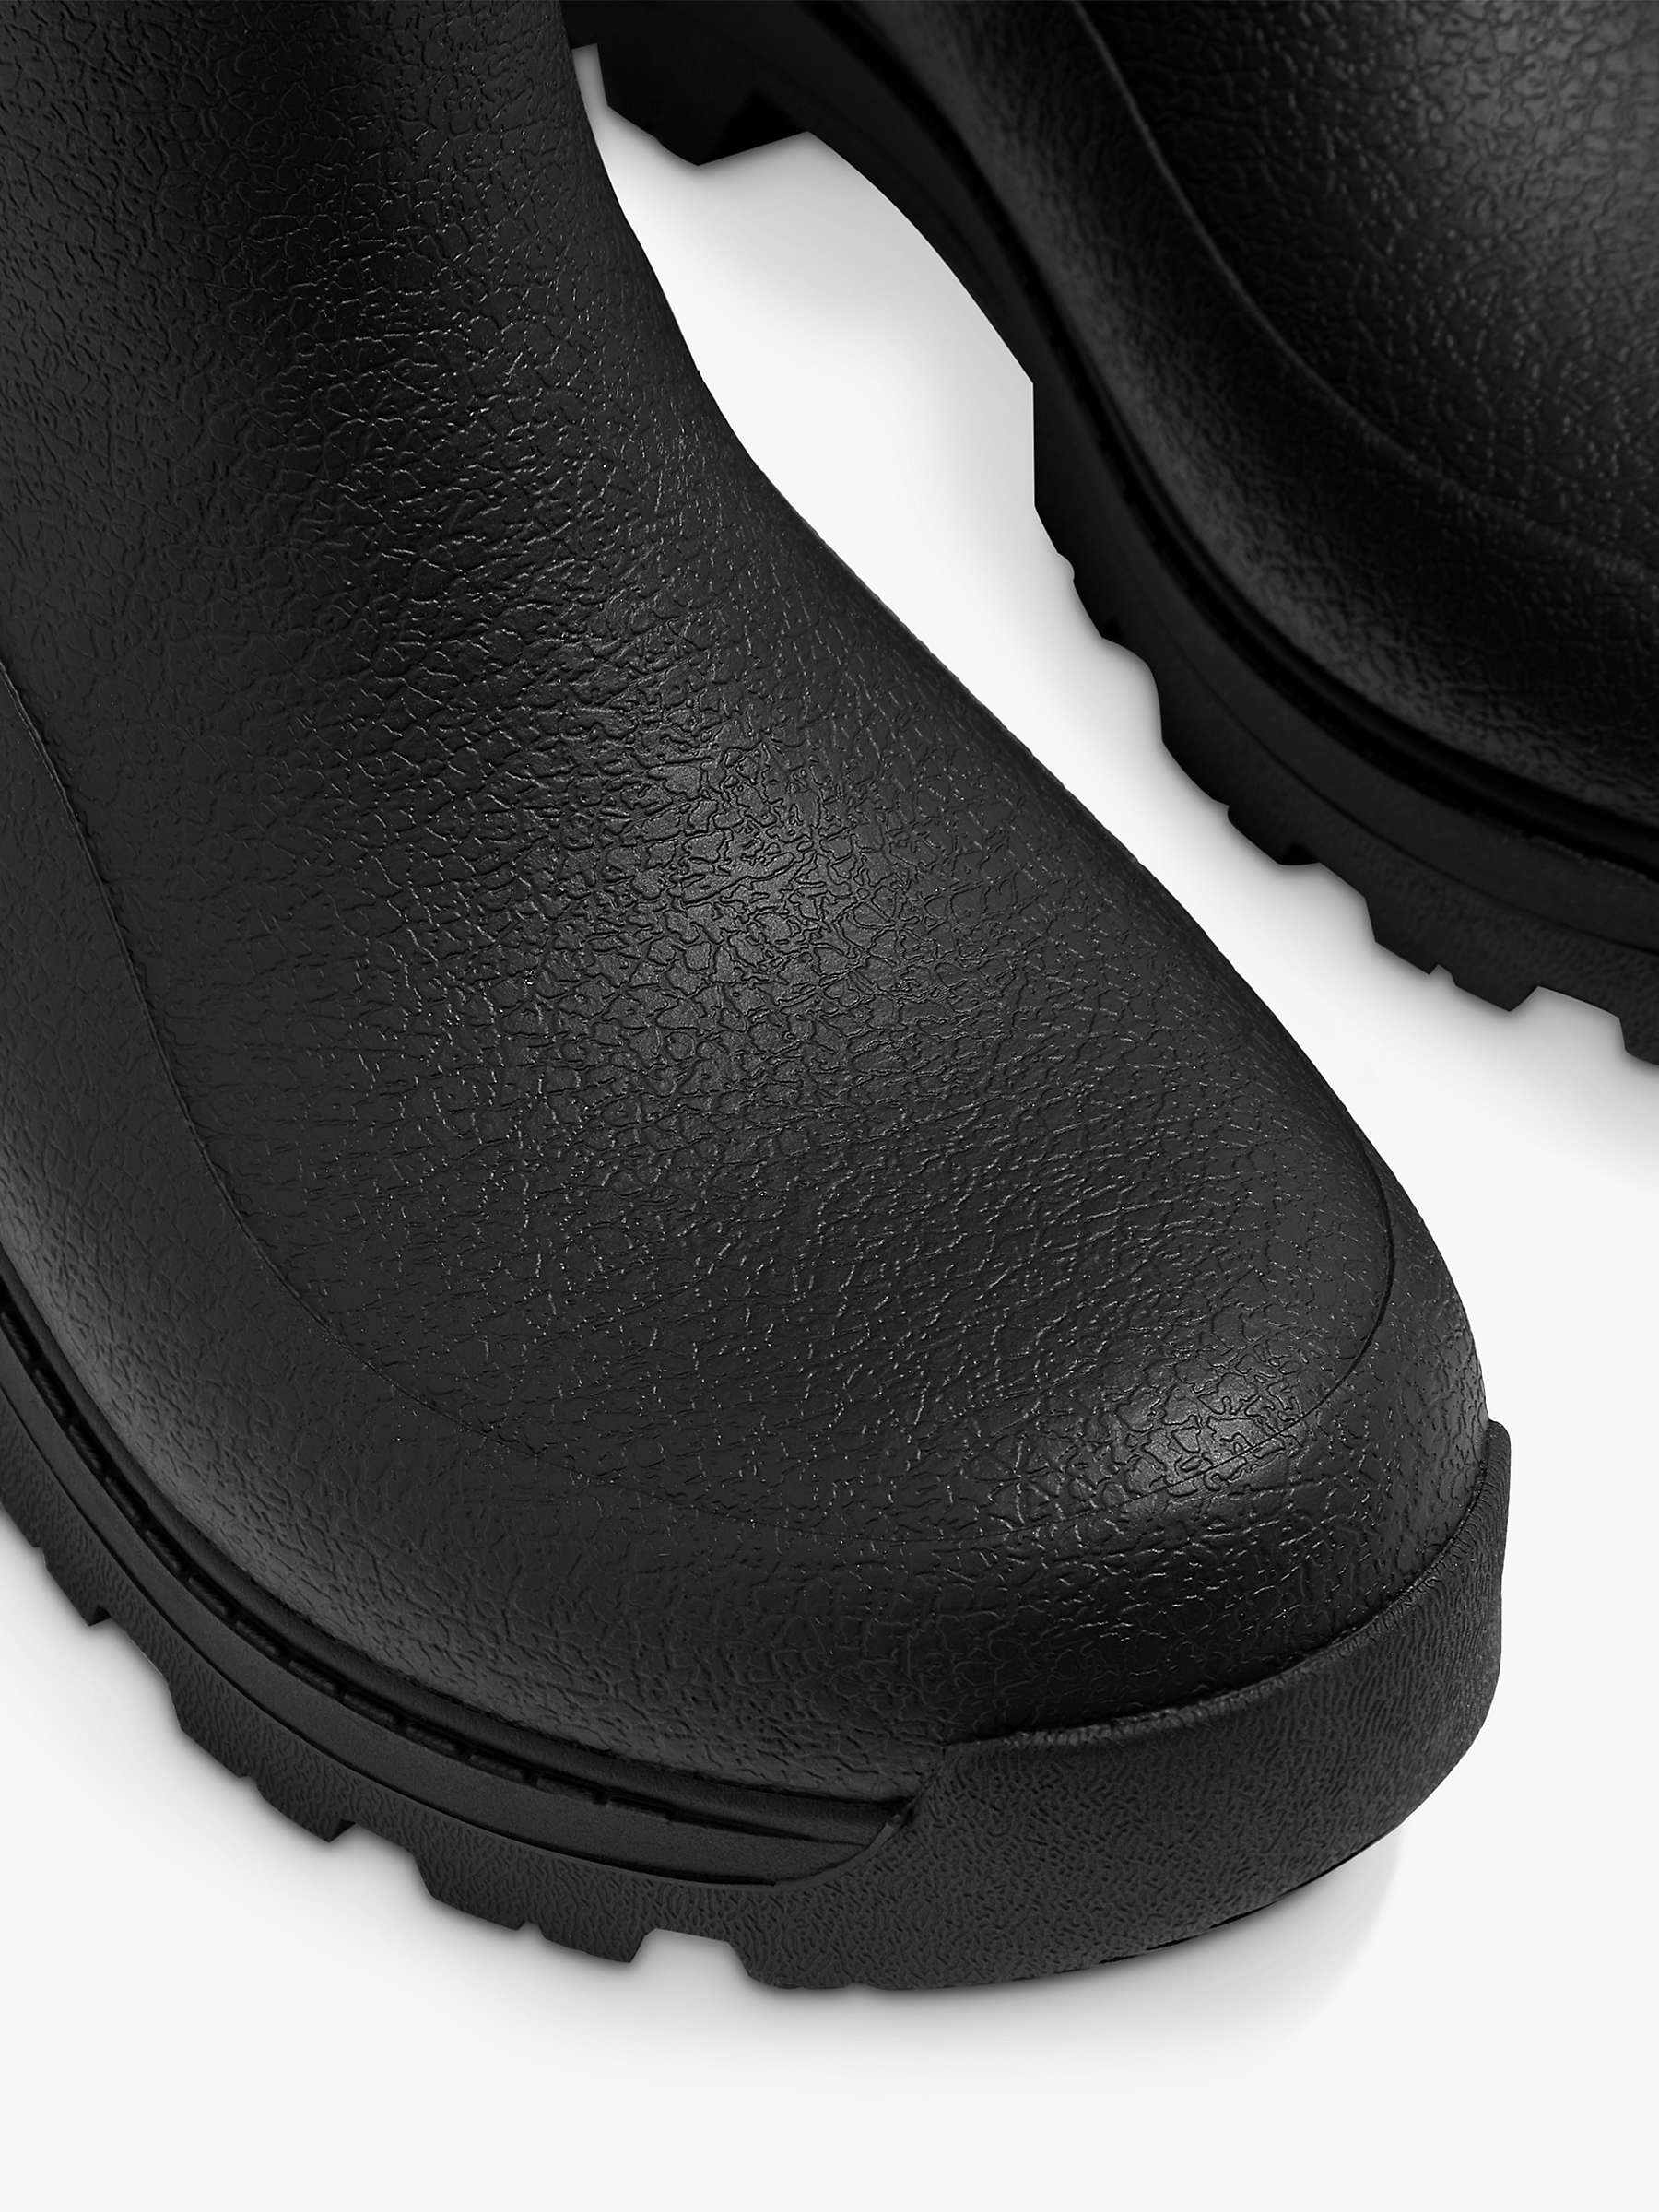 Buy FitFlop Wonderwelly Tall Wellington Boots Online at johnlewis.com